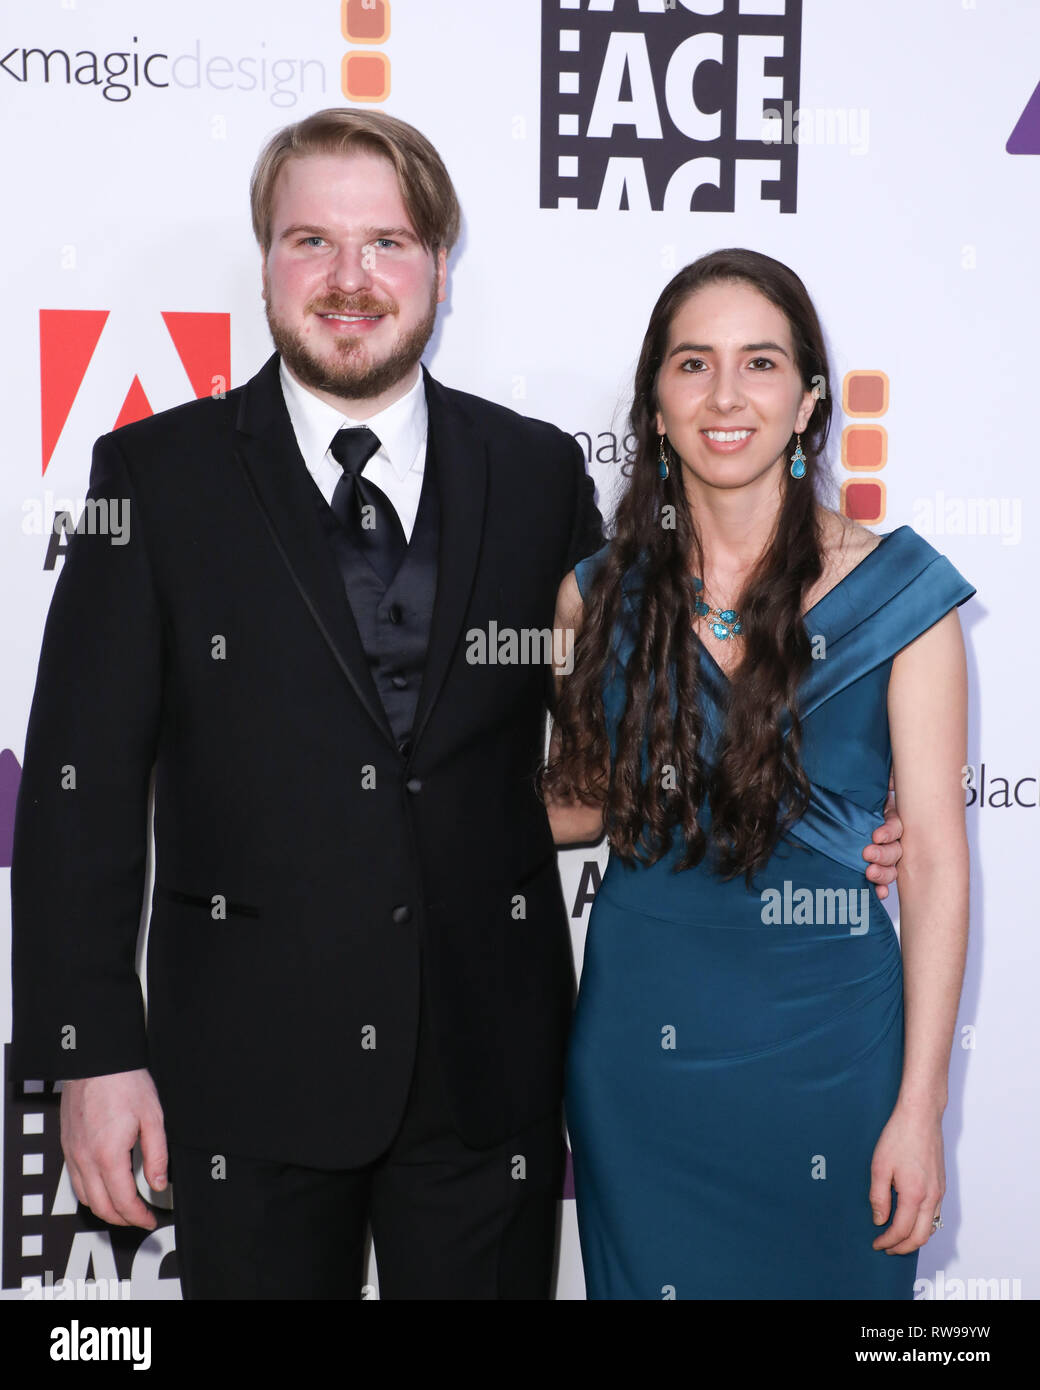 69th Annual ACE Eddie Awards held at the Beverly Hilton Hotel - Arrivals  Featuring: Edward Bursch, Brooke Paha Where: Los Angeles, California, United States When: 01 Feb 2019 Credit: Sheri Determan/WENN.com Stock Photo